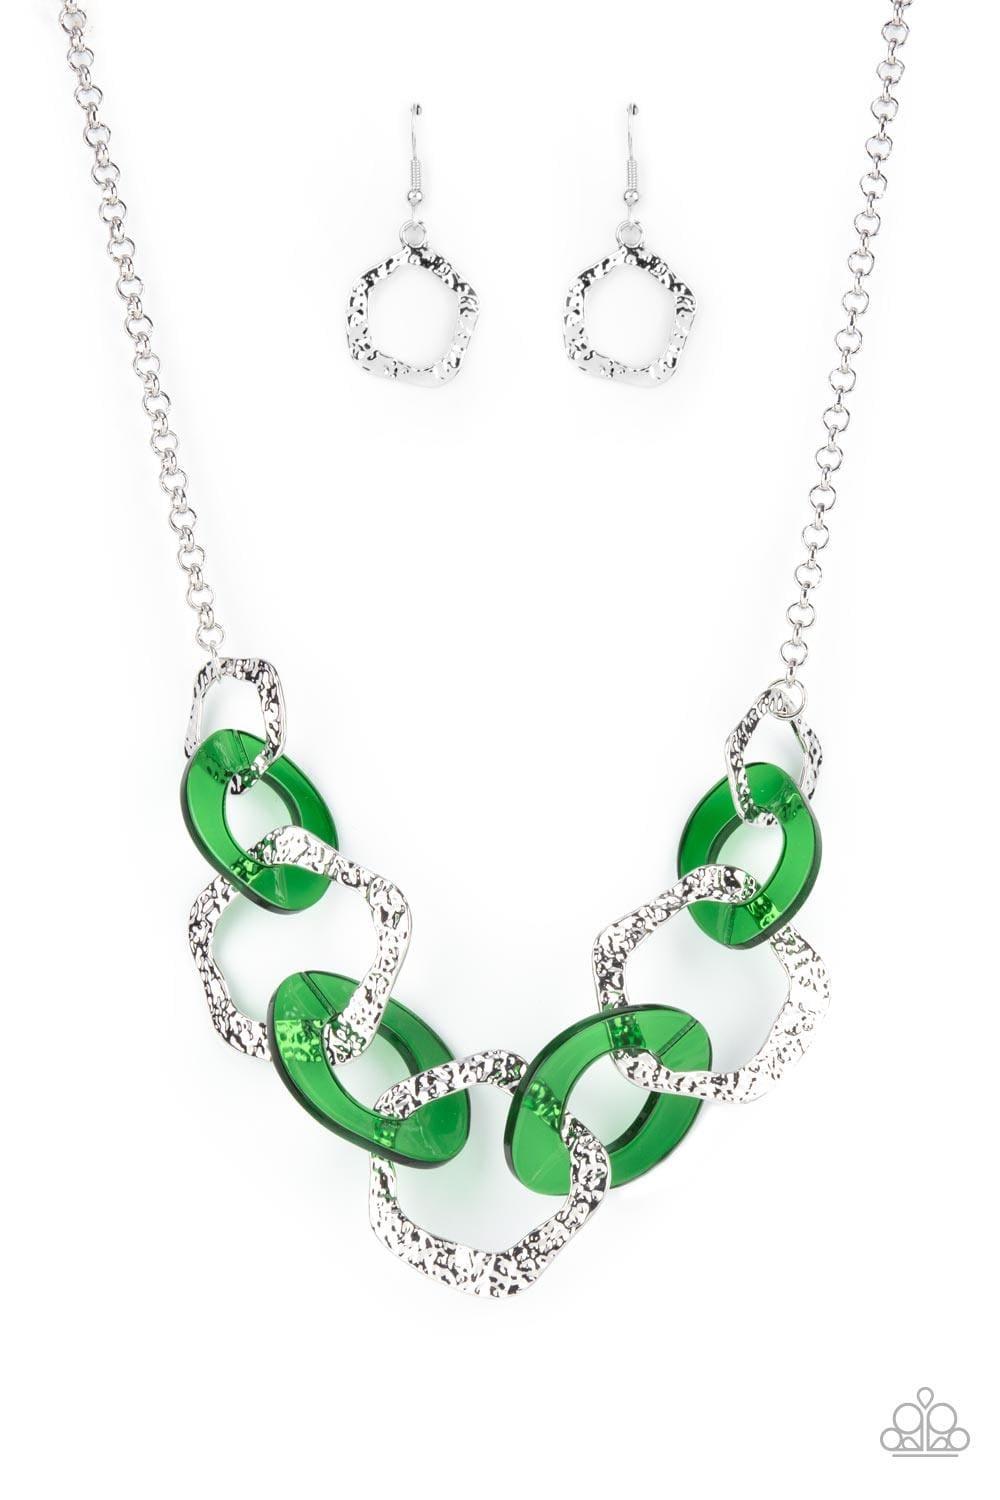 Paparazzi Accessories - Urban Circus - Green Necklace - Bling by JessieK